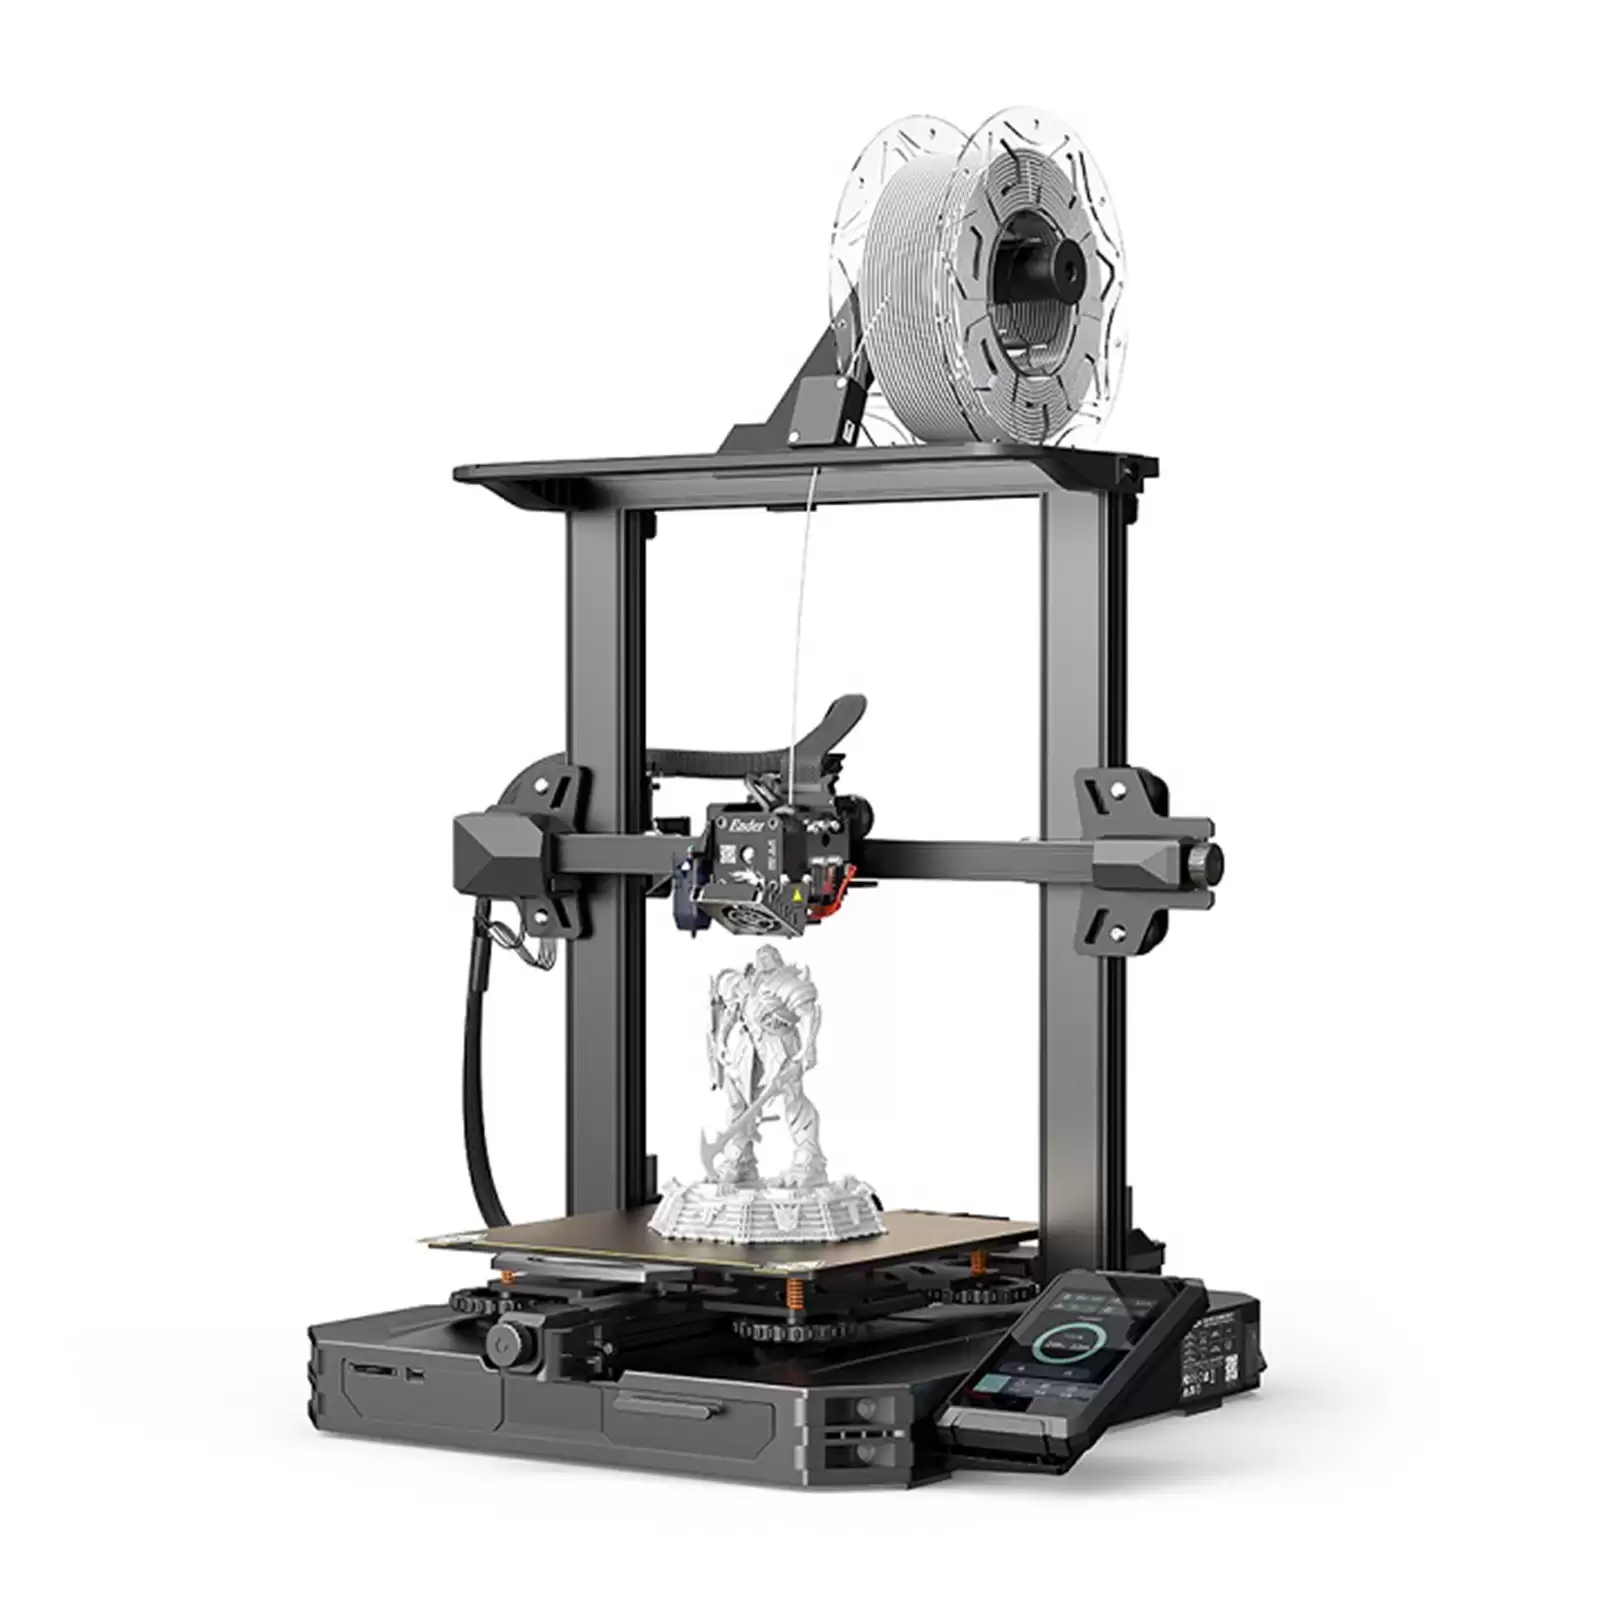 Order In Just €245 Original Creality 3d Ender-3 S1 Pro Desktop 3d Printer With This Discount Coupon At Tomtop